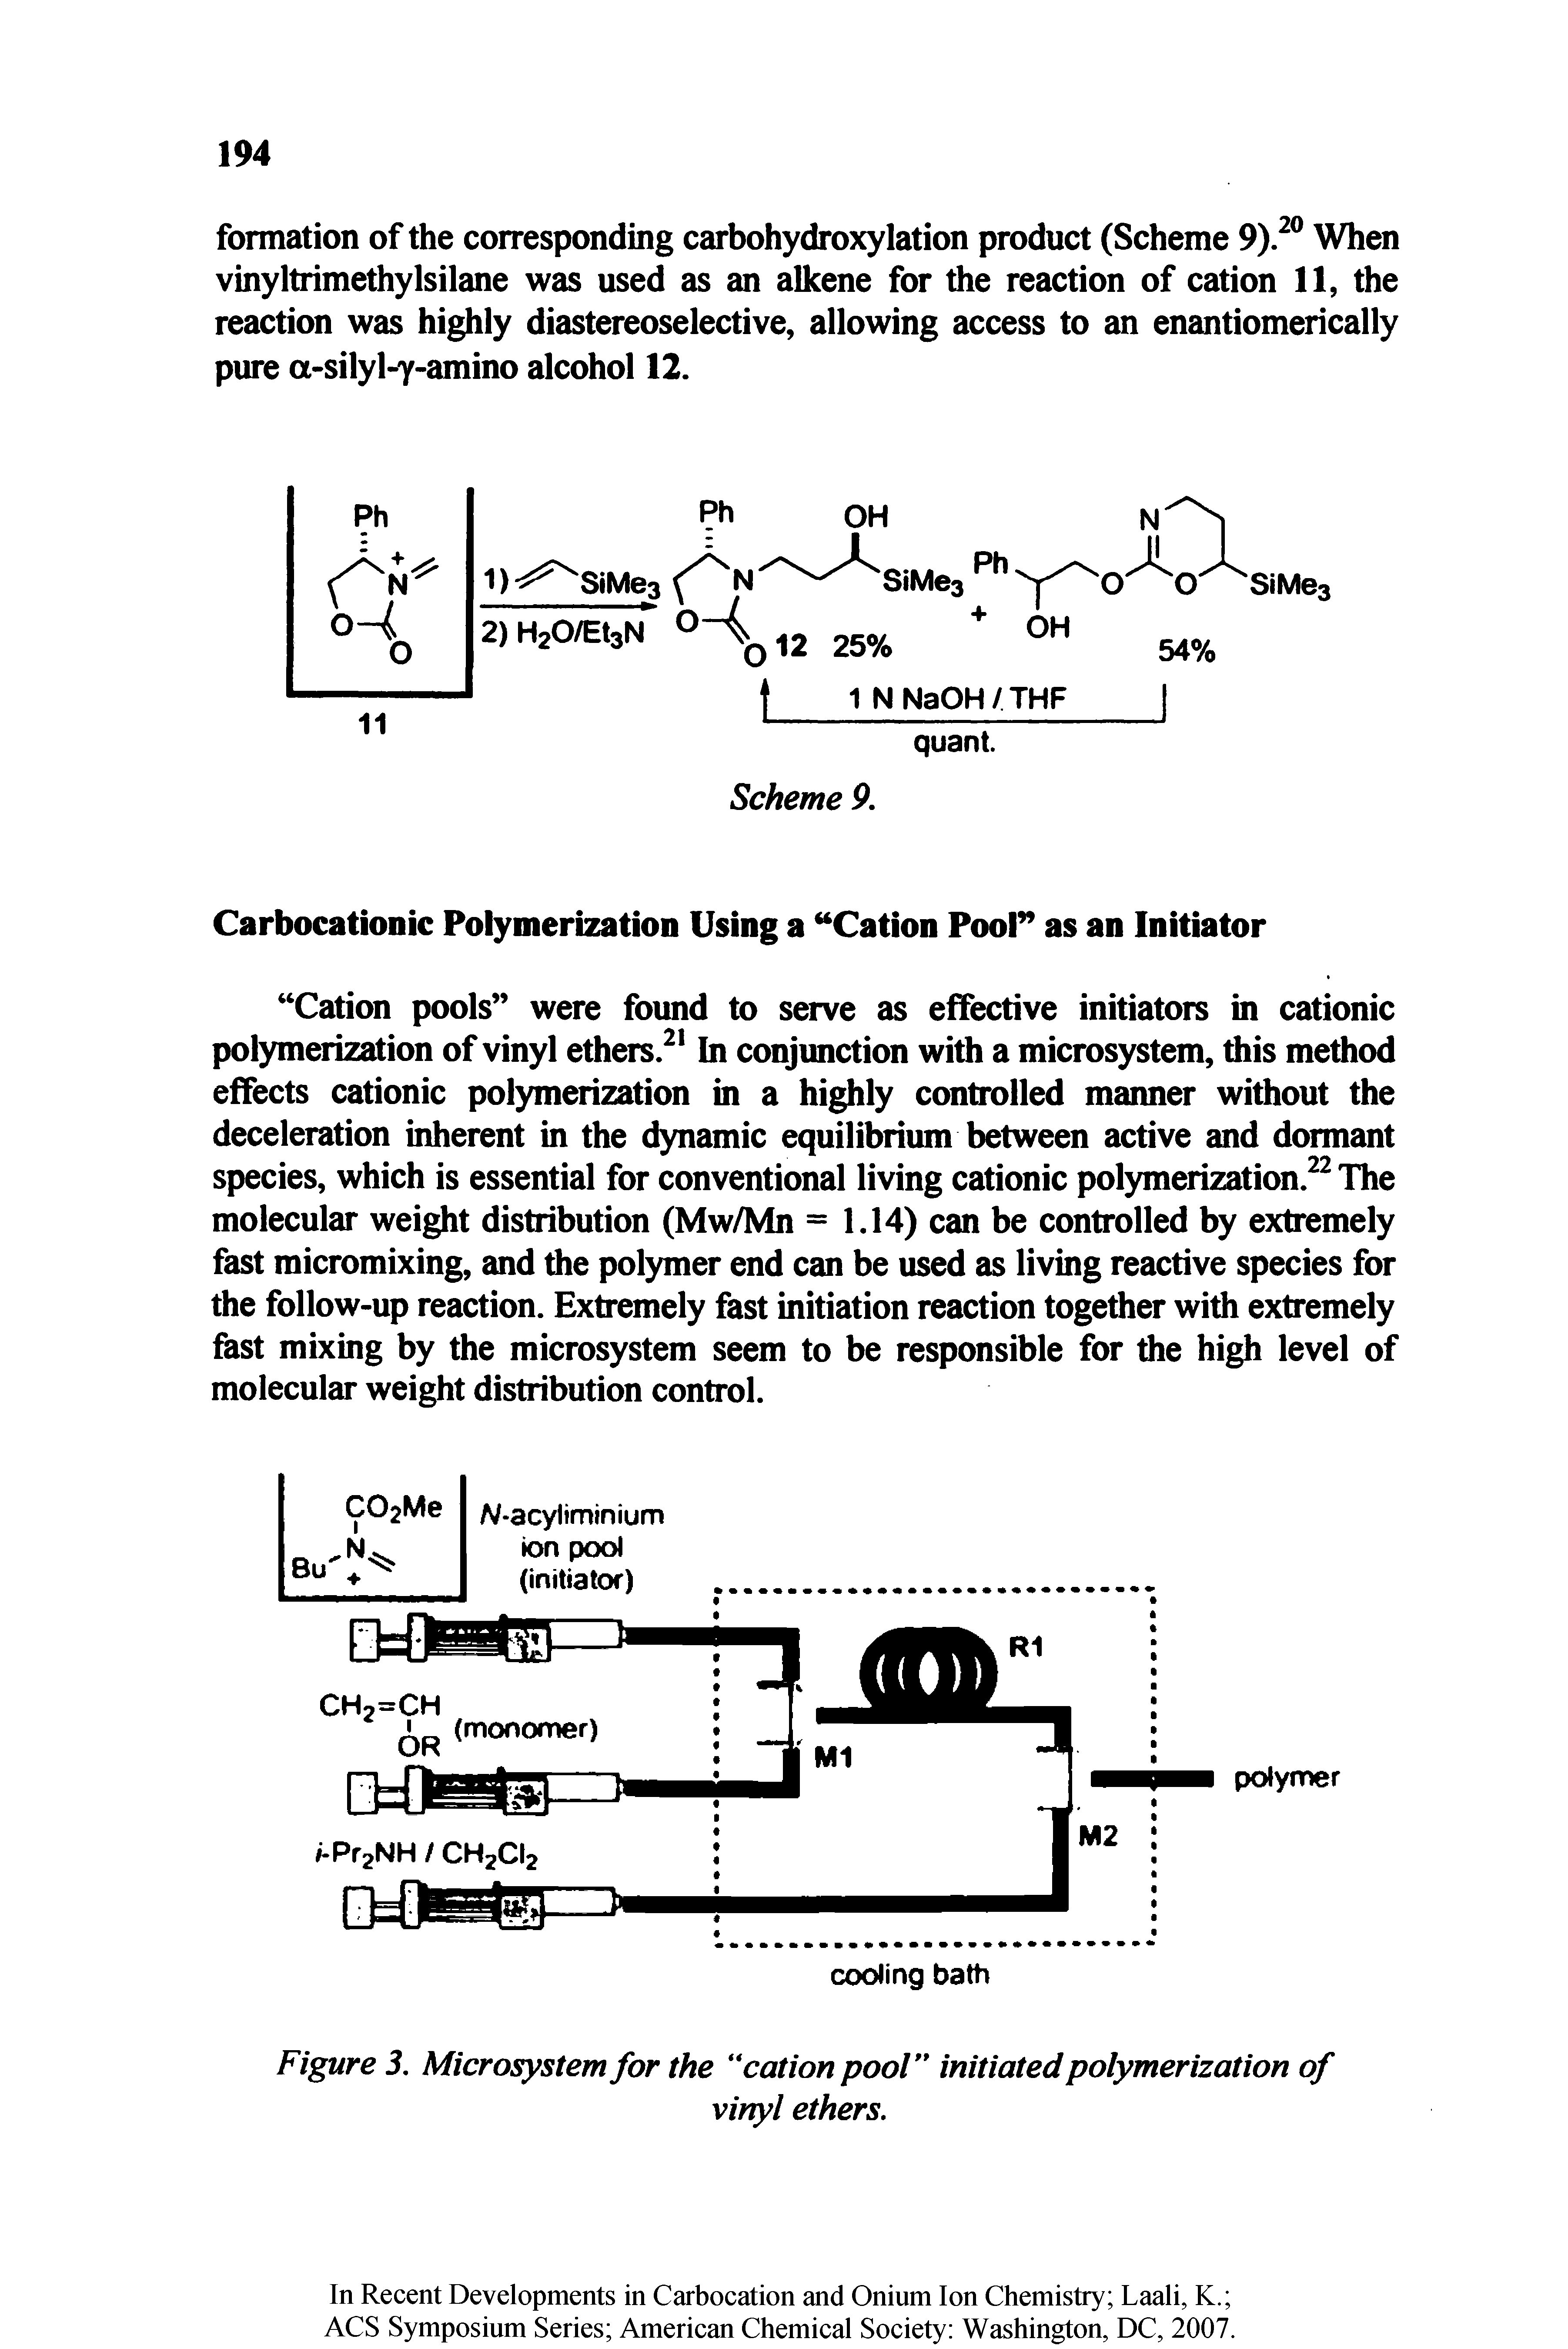 Figure 3. Microsystem for the "cation pool initiated polymerization of...